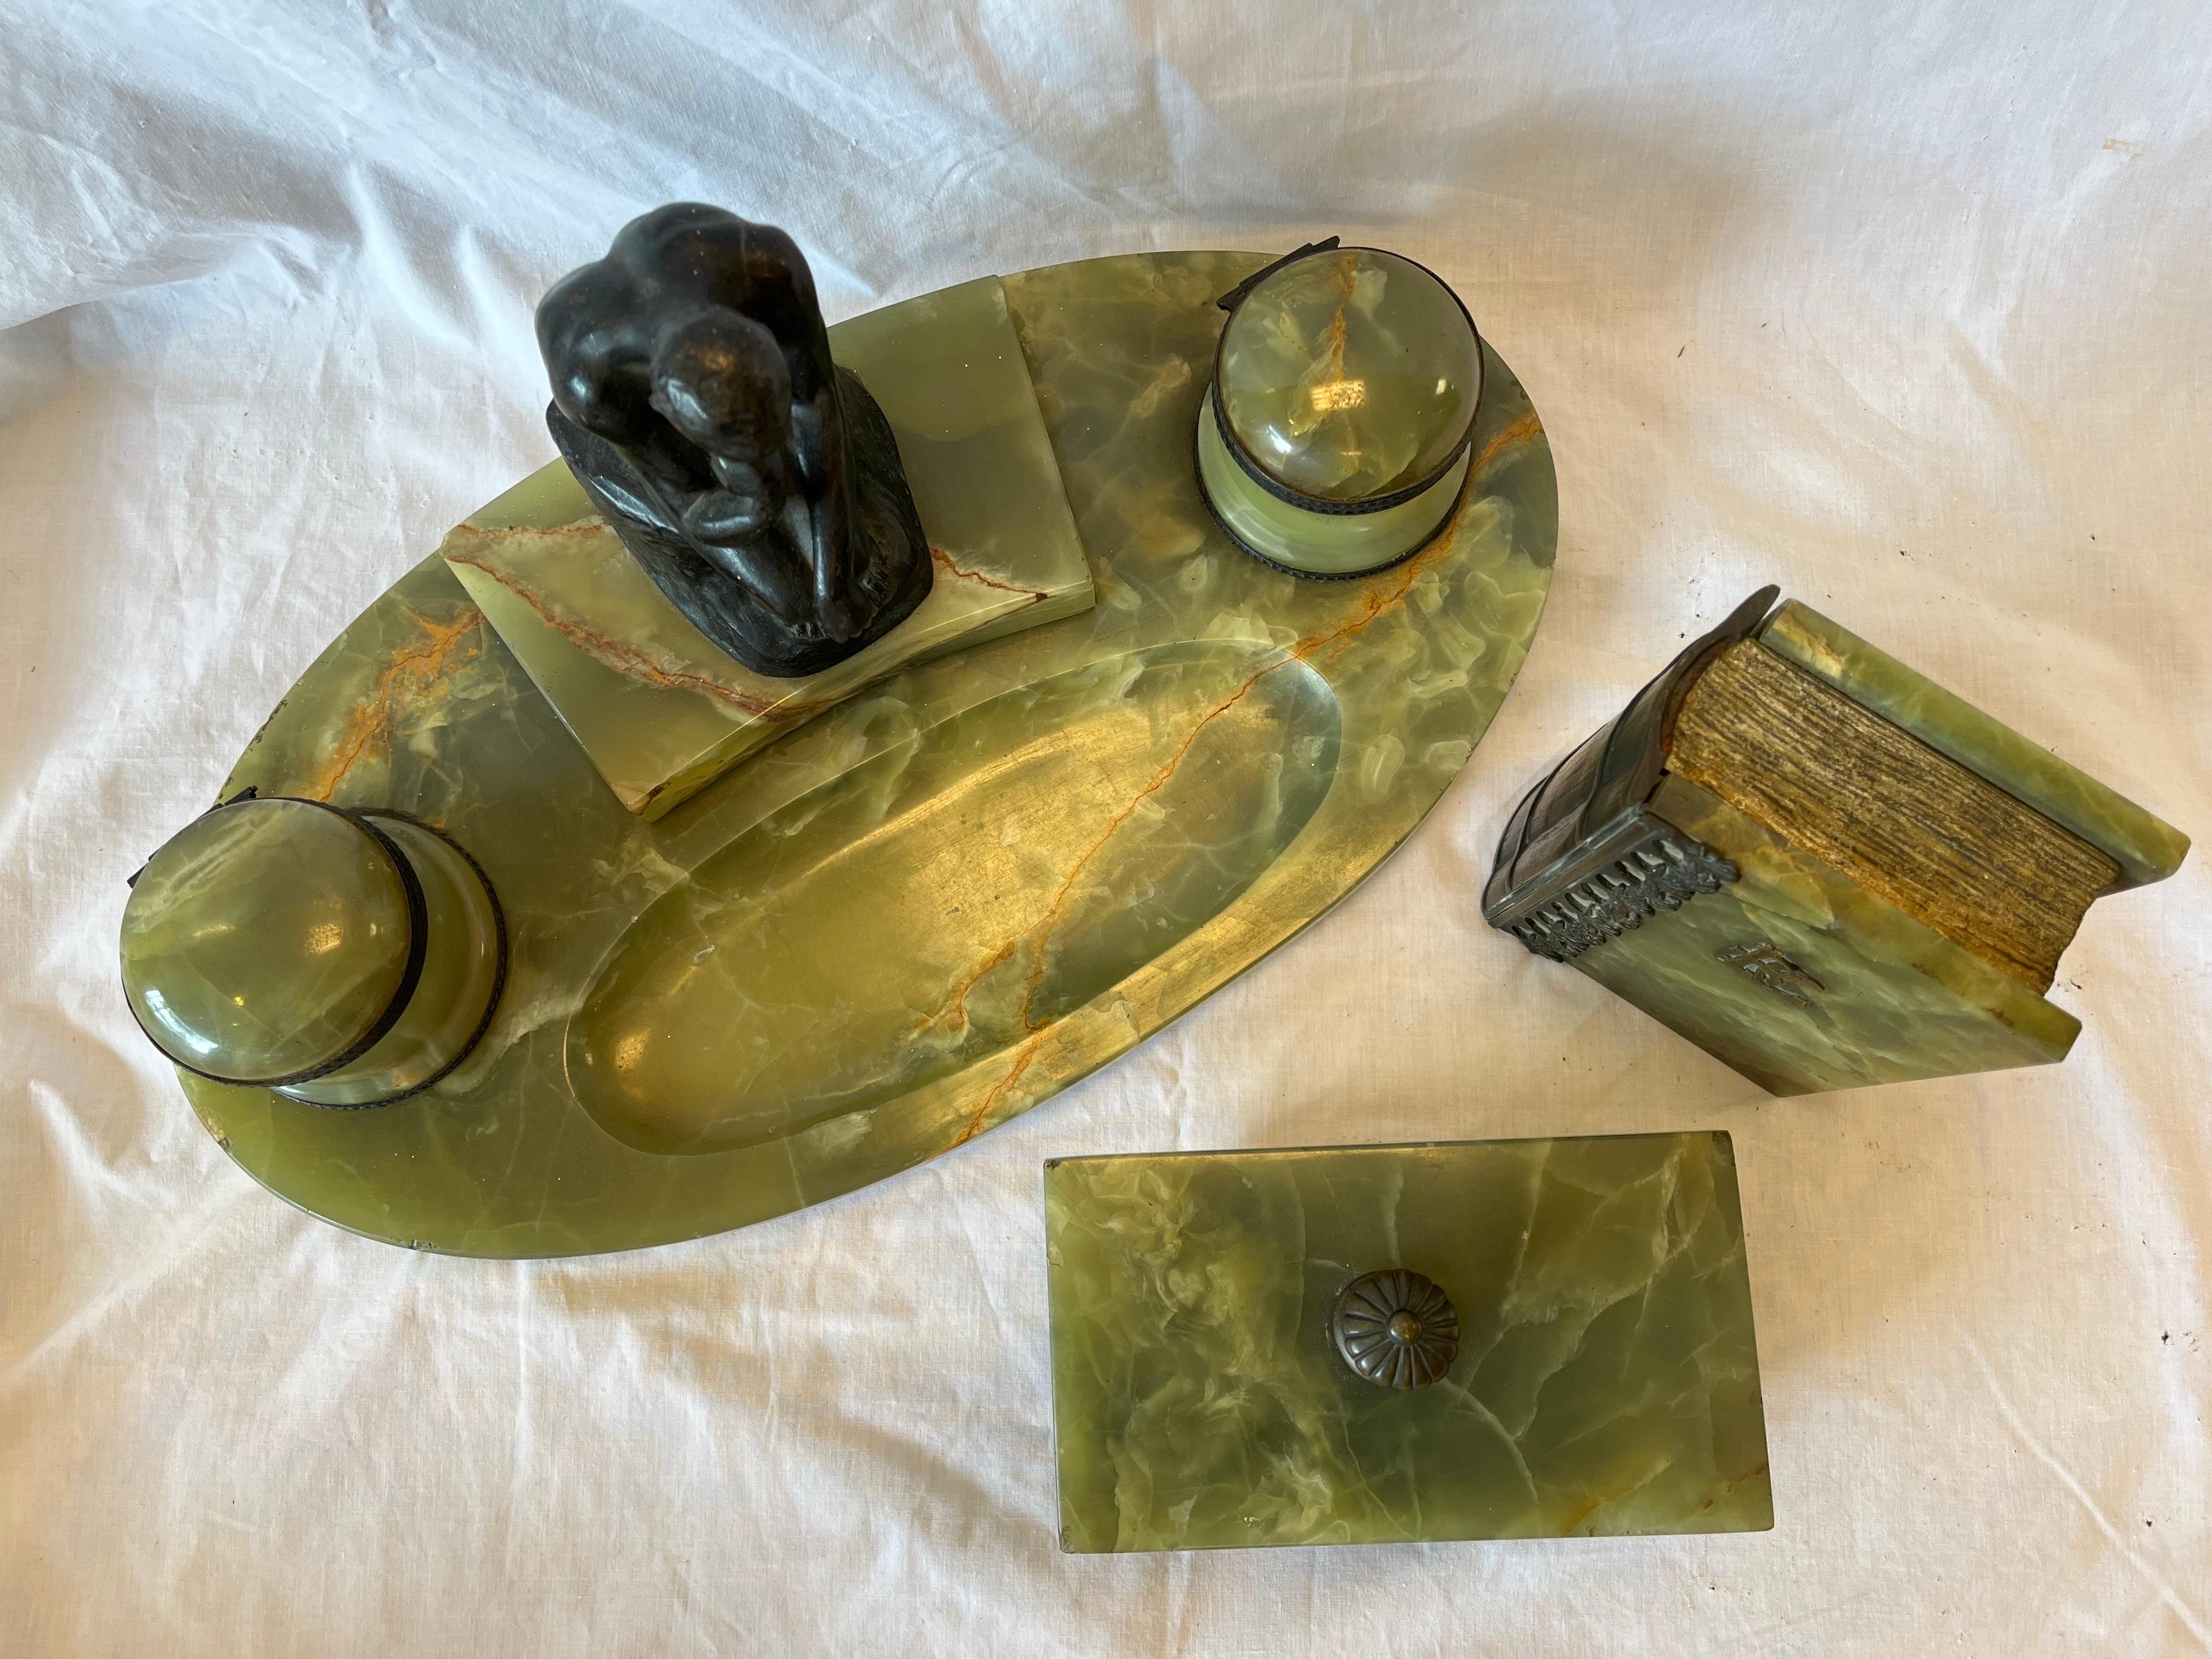 20th Century Fine Antique Onyx and Bronze Desk Ink Stand Pen Rest Faux Book and Blotter Set For Sale